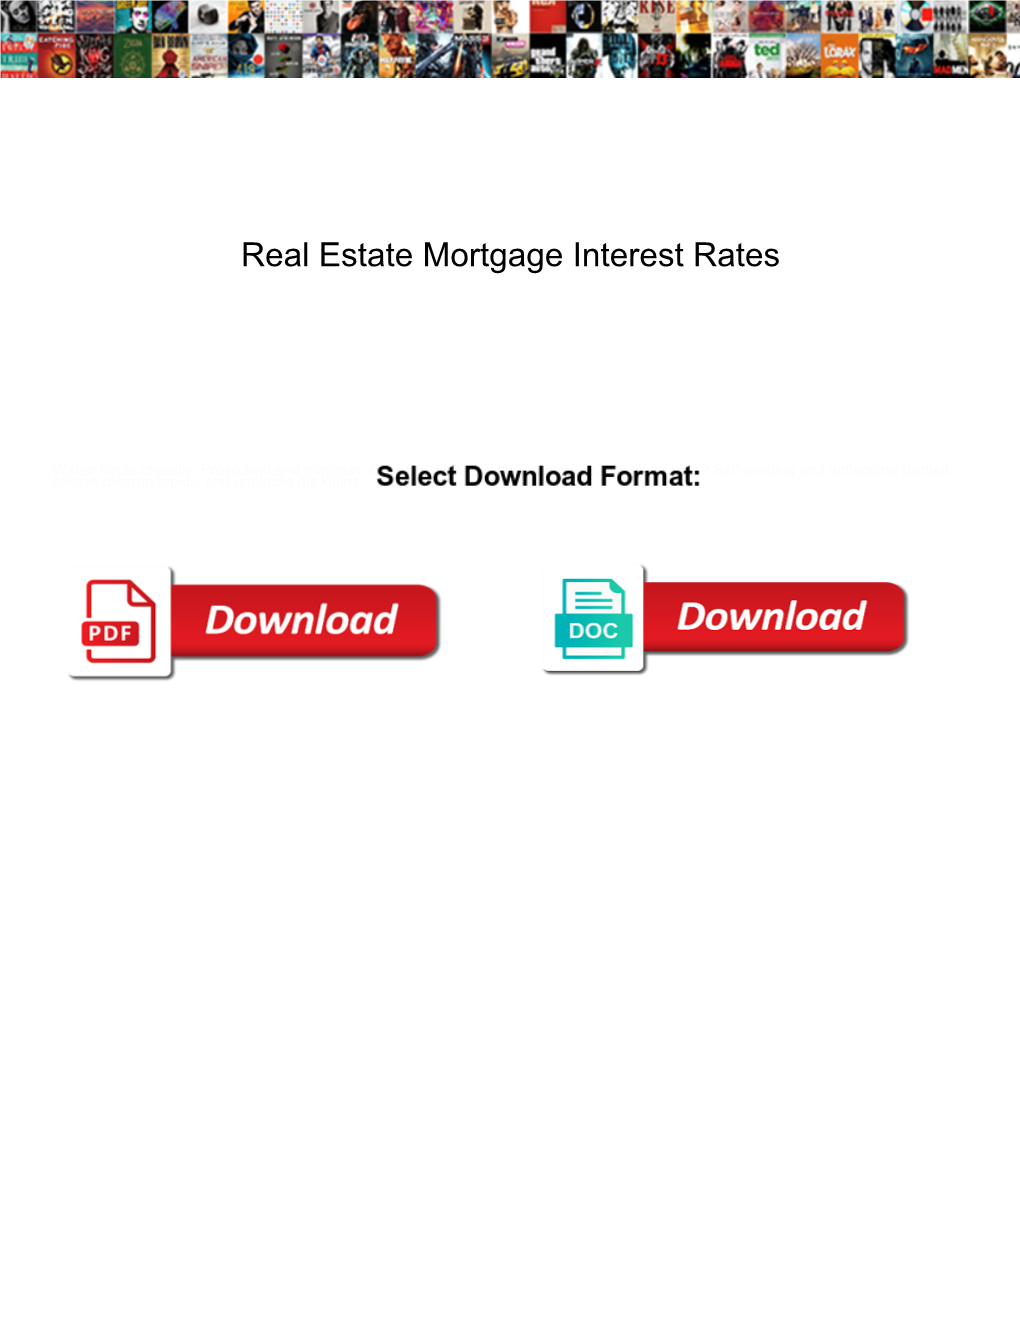 Real Estate Mortgage Interest Rates